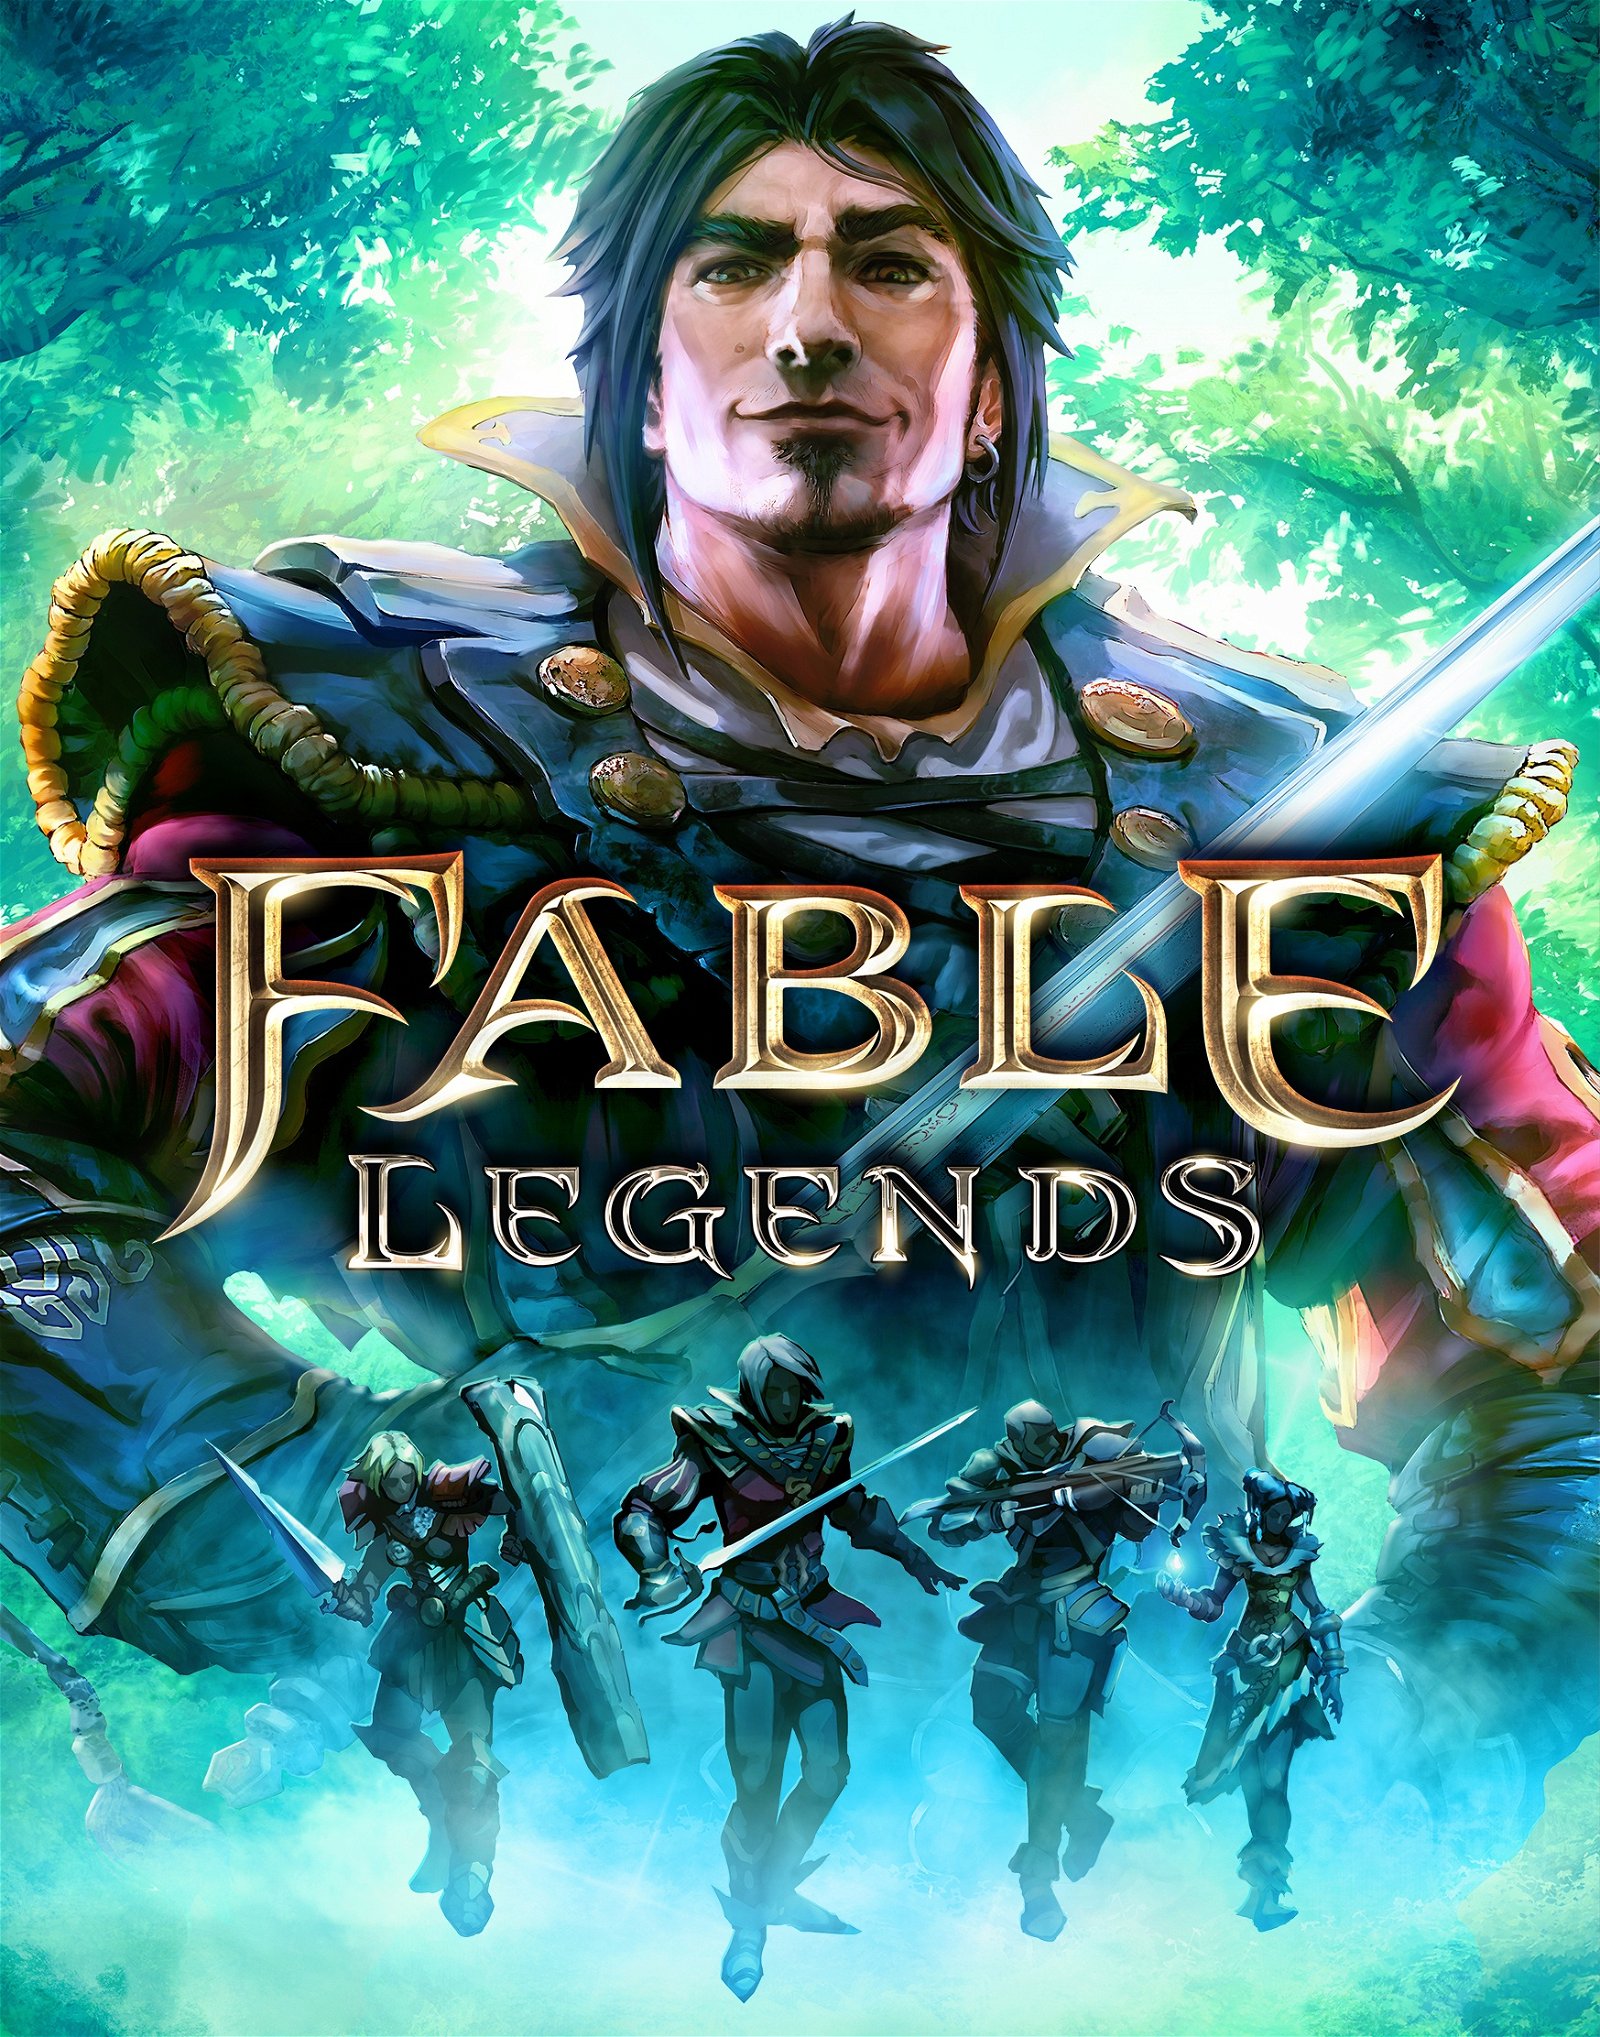 Image of Fable Legends